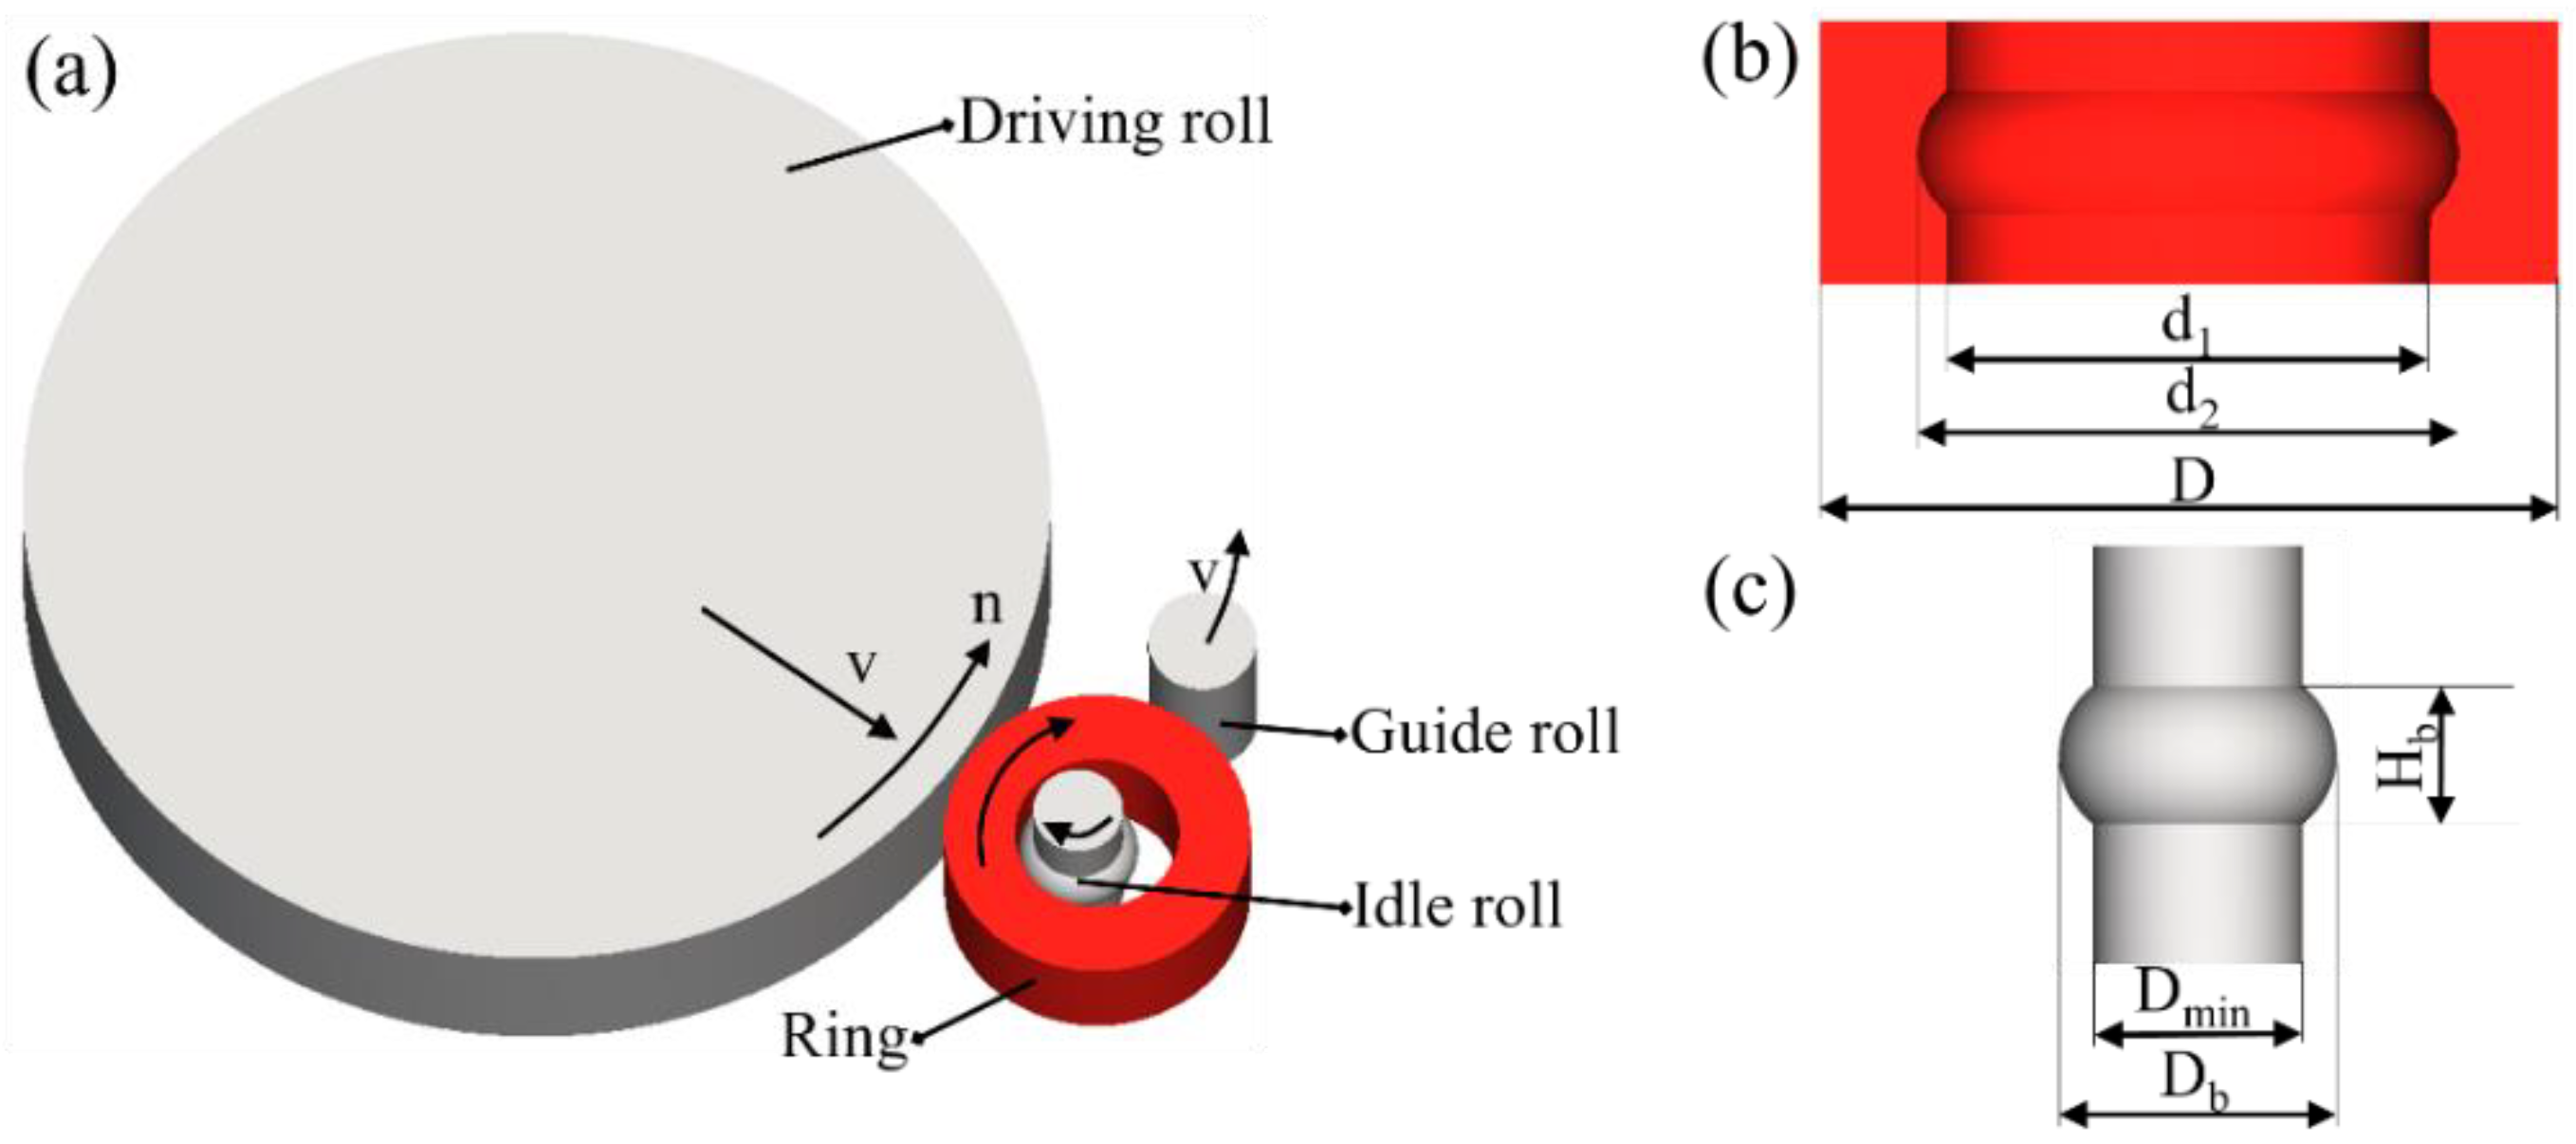 What is ring rolling? - Quora